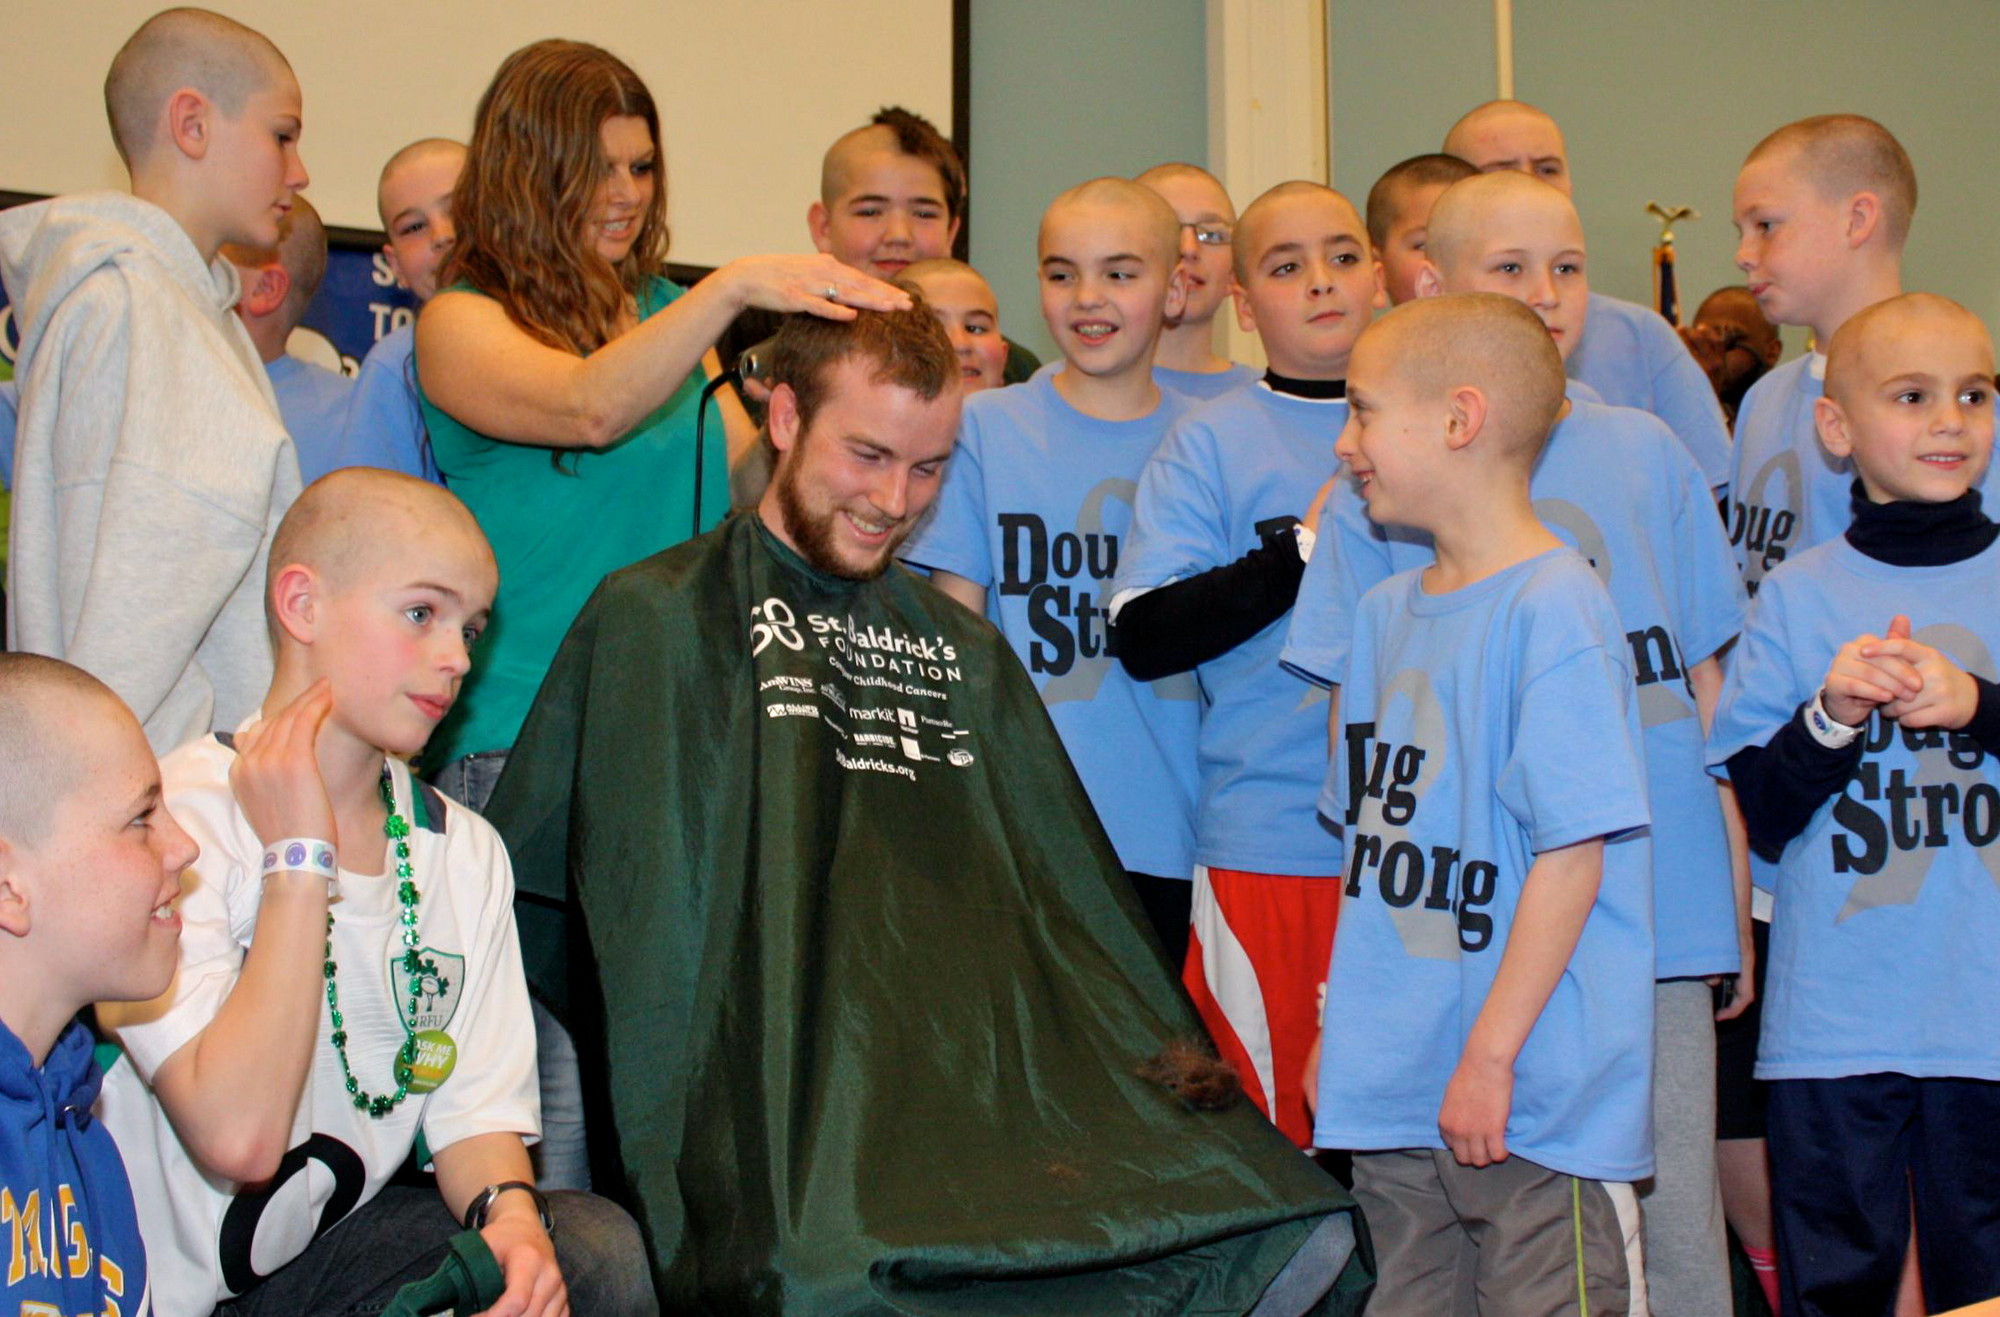 Friends and family of Doug Gonzalez had their heads shaved at the St. Baldrick's Foundation event last month in Rockville Centre. The group raised more that $21,000 for cancer research in Doug's name.